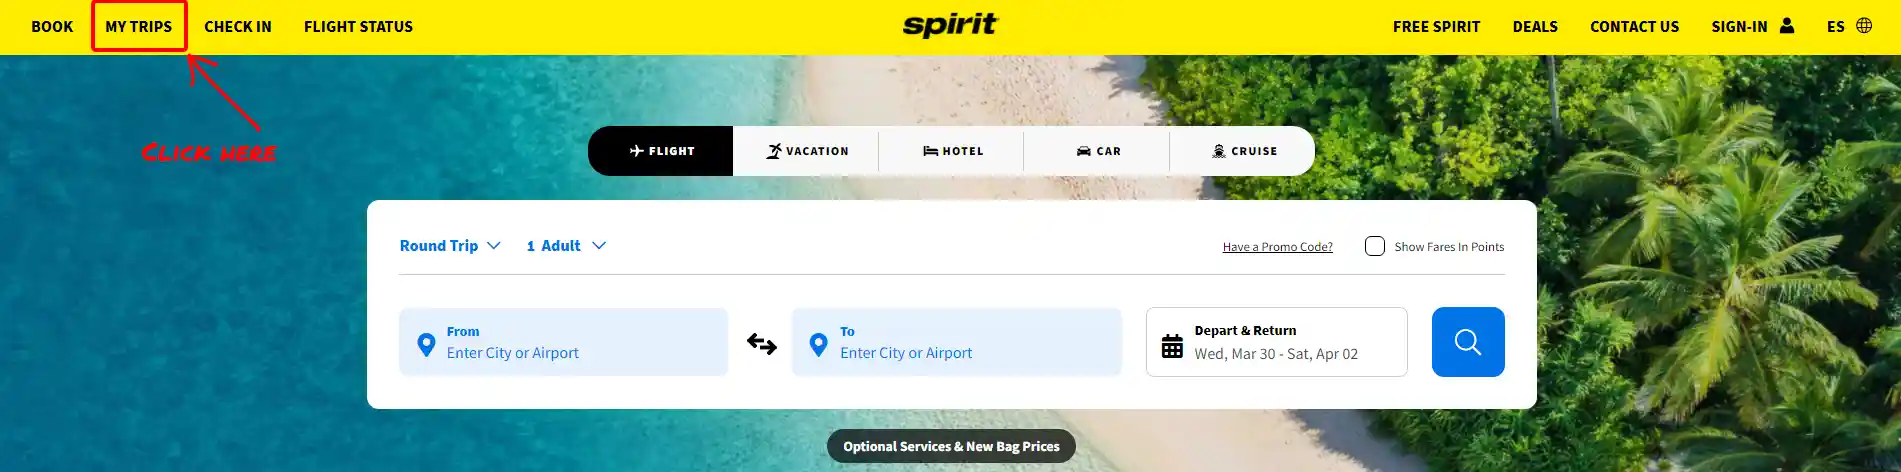 Spirit Airlines My Trips